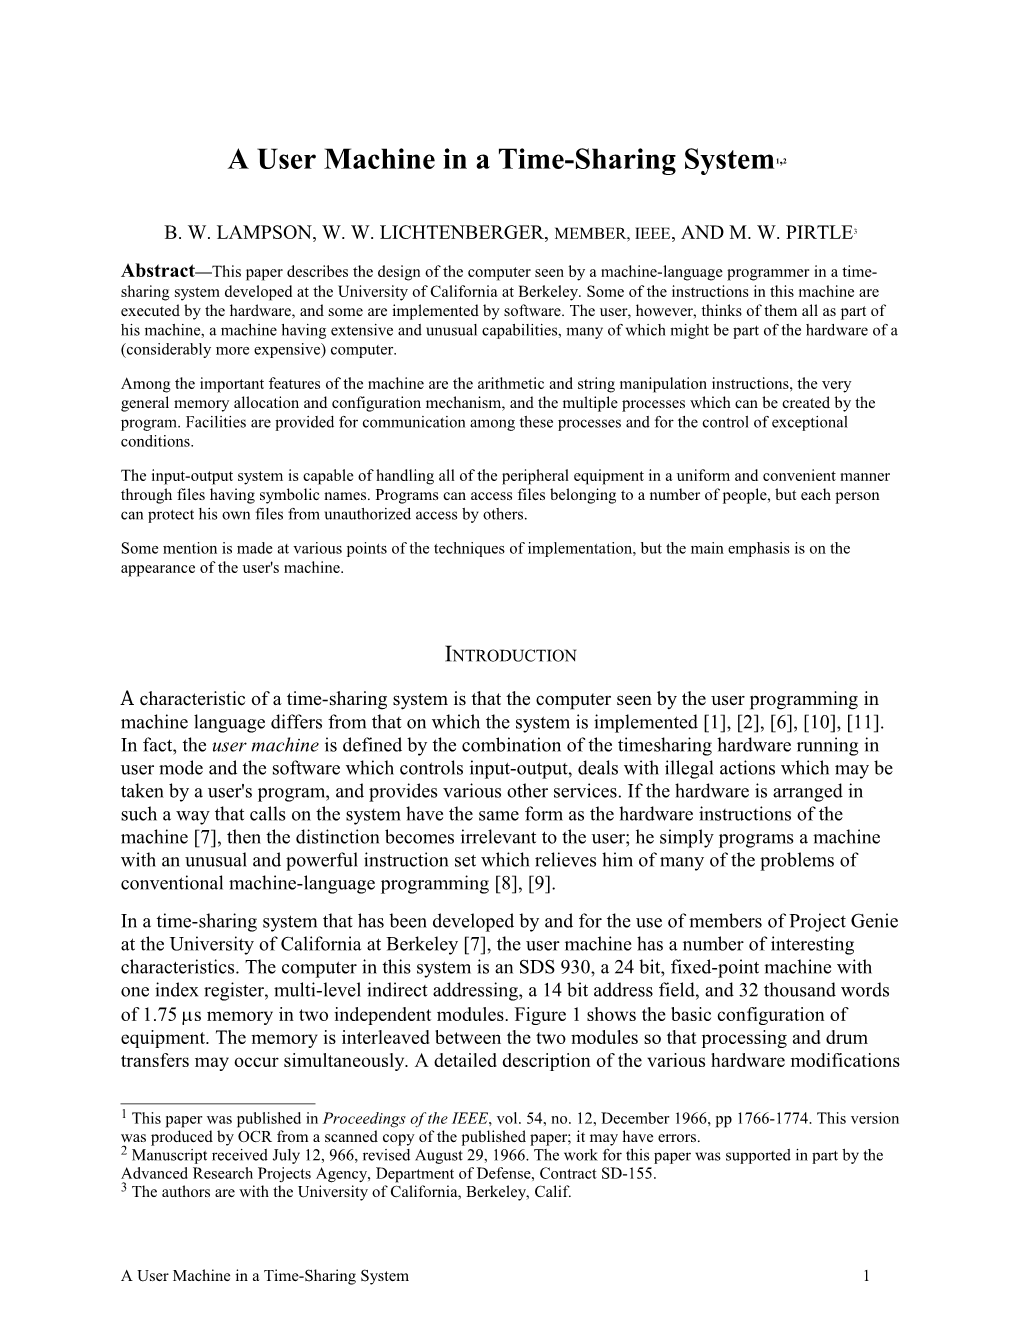 Lampson, Lichtenberger, and Pirtla - a User Machine in a Time-Sharing System